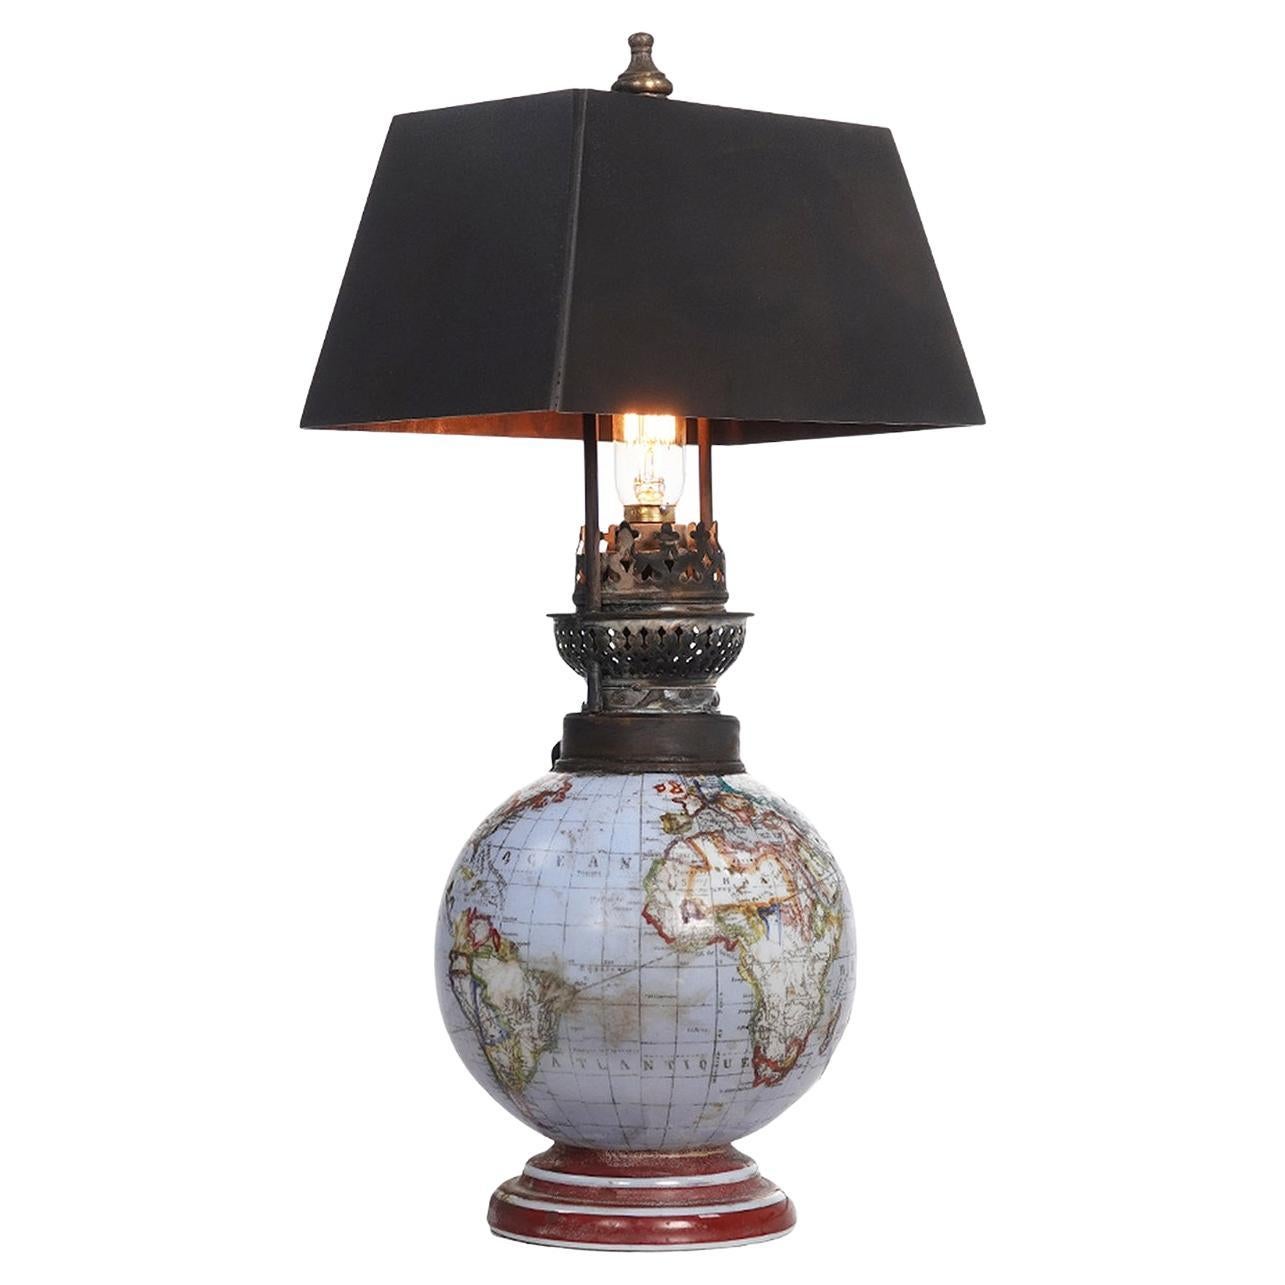 These small glass globe lamps are impossible to find and yet we have a pair. These are highly sought ofter by globe collectors. The globes are different example but they have matching dark brass shades. These could have been early oil lamps that are